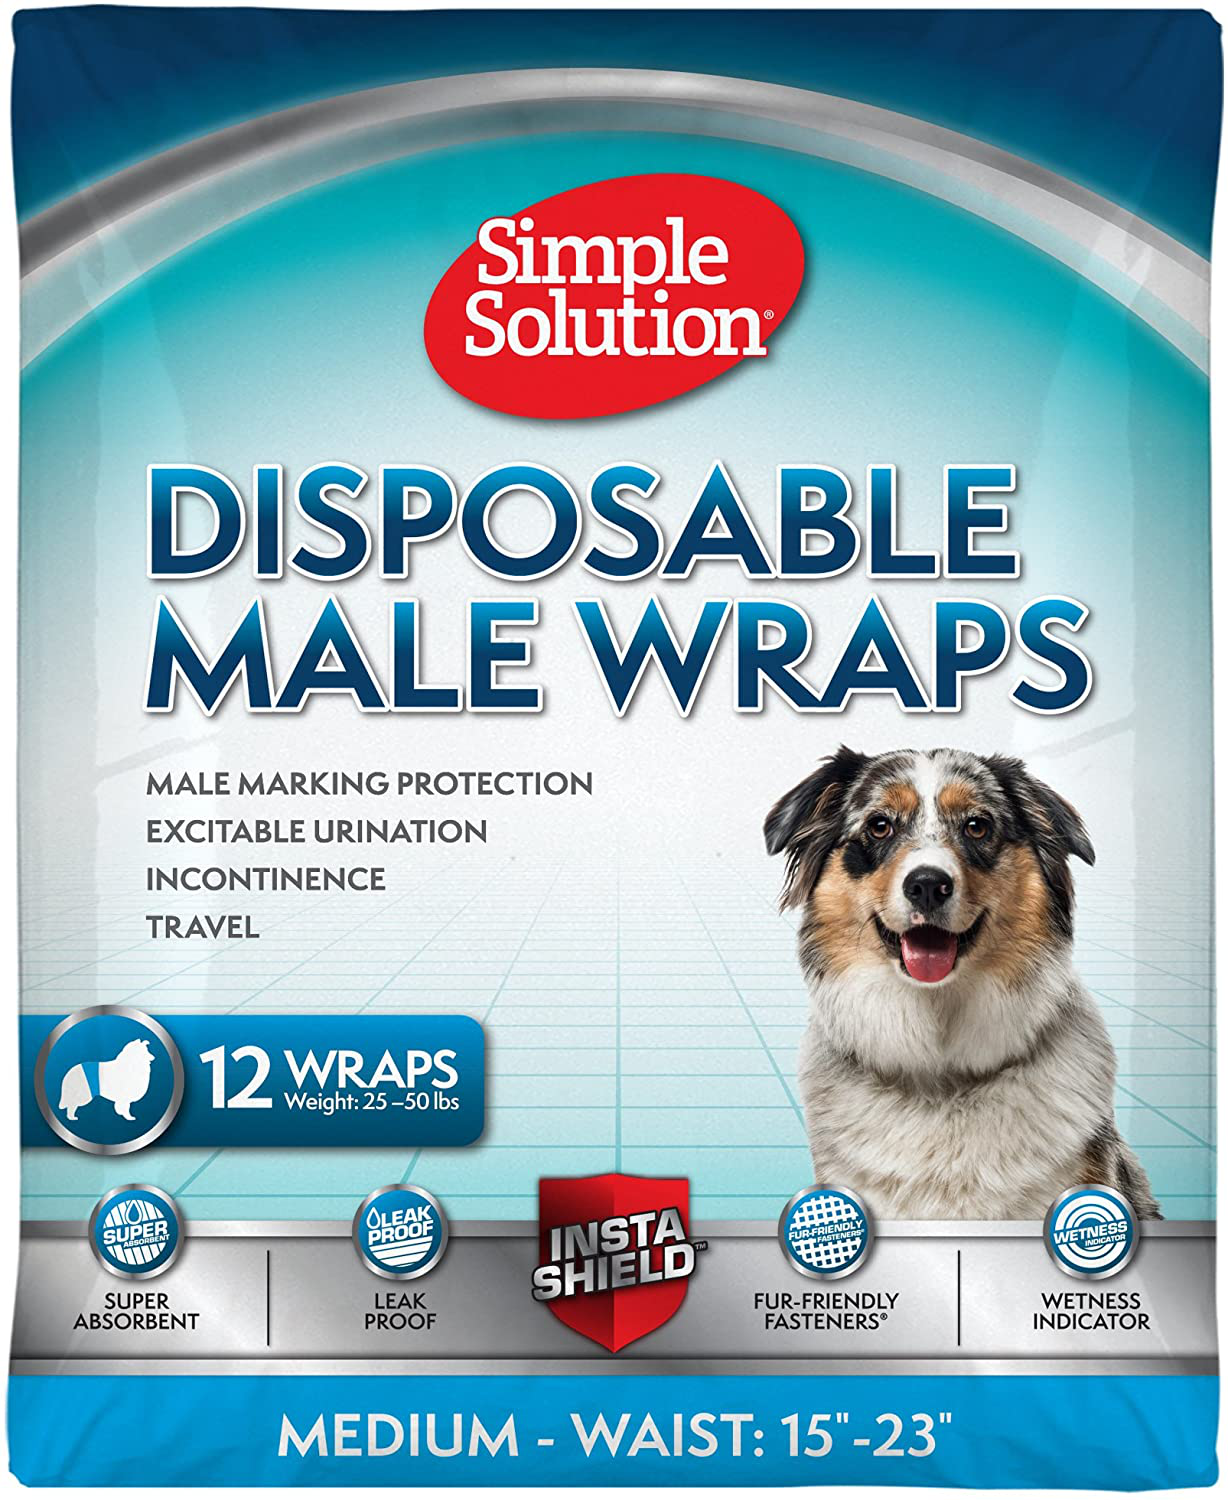 Simple Solution Disposable Dog Diapers for Male Dogs | Male Wraps with Super Absorbent Leak-Proof Fit